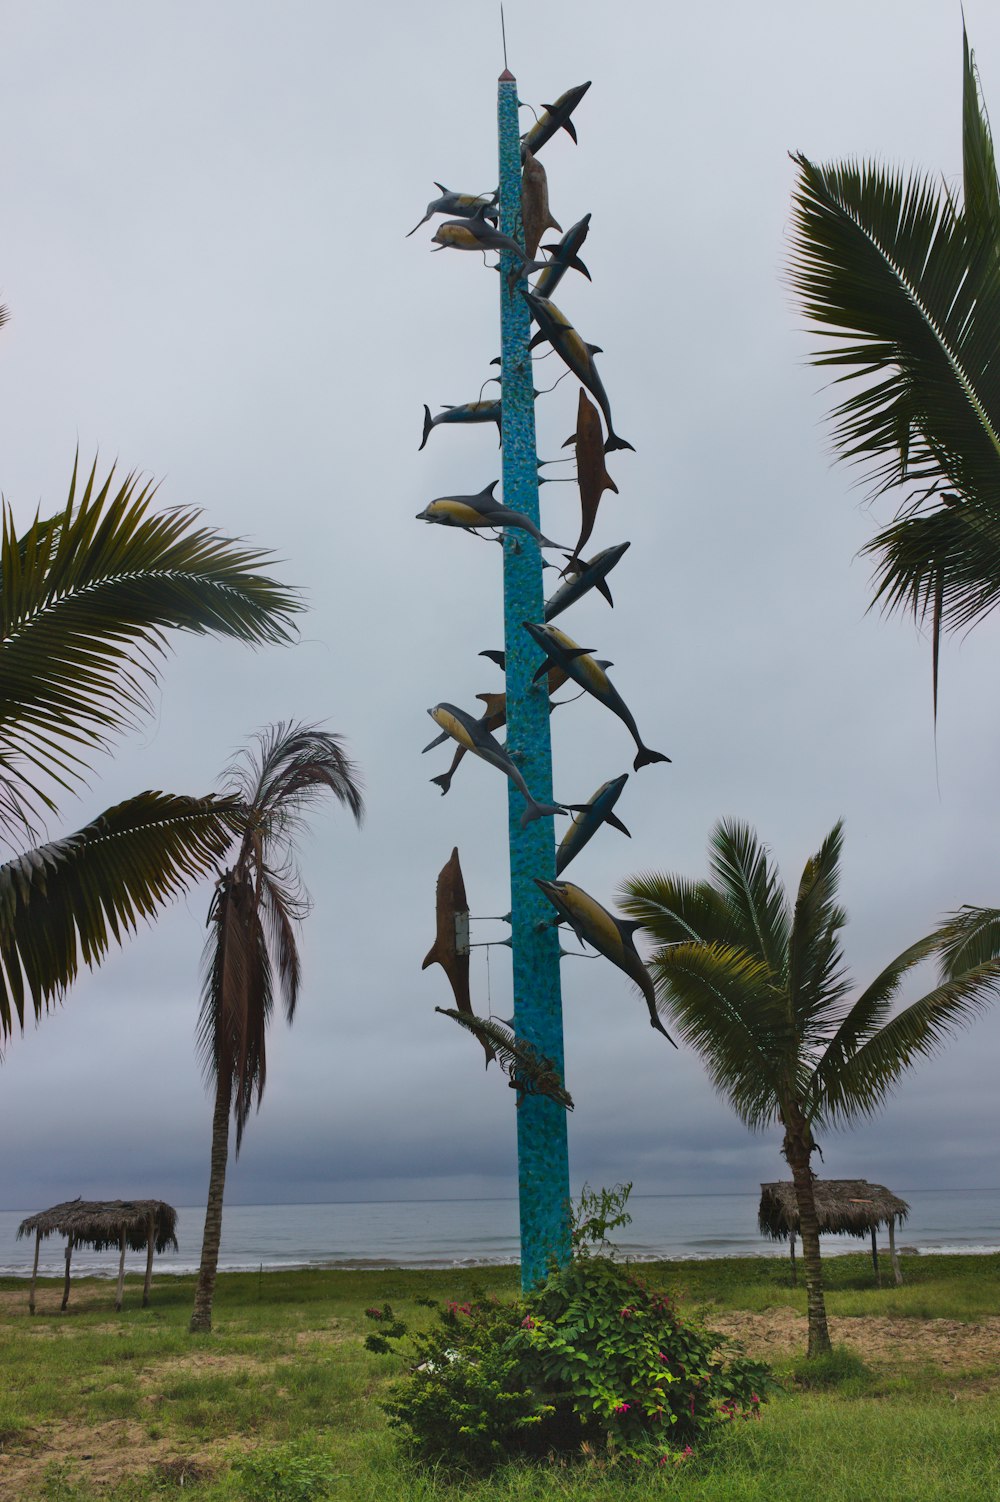 a tall pole with a bird on it by palm trees and a body of water